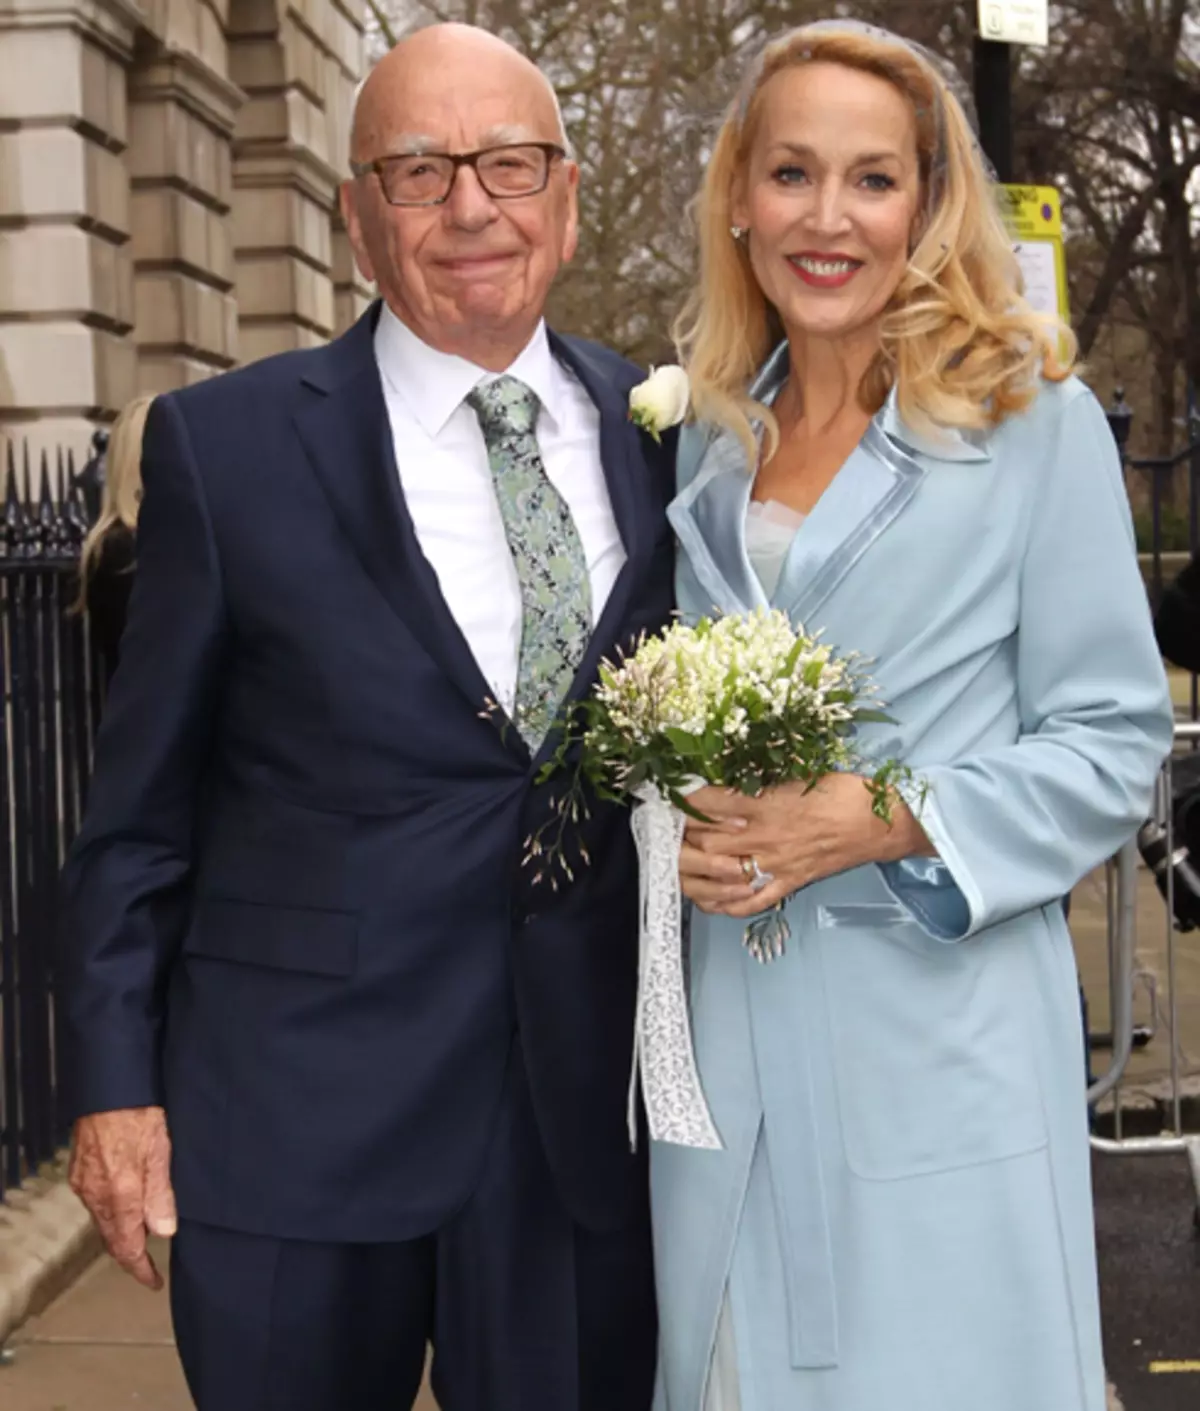 Rupert herdoch and Jerry Hall